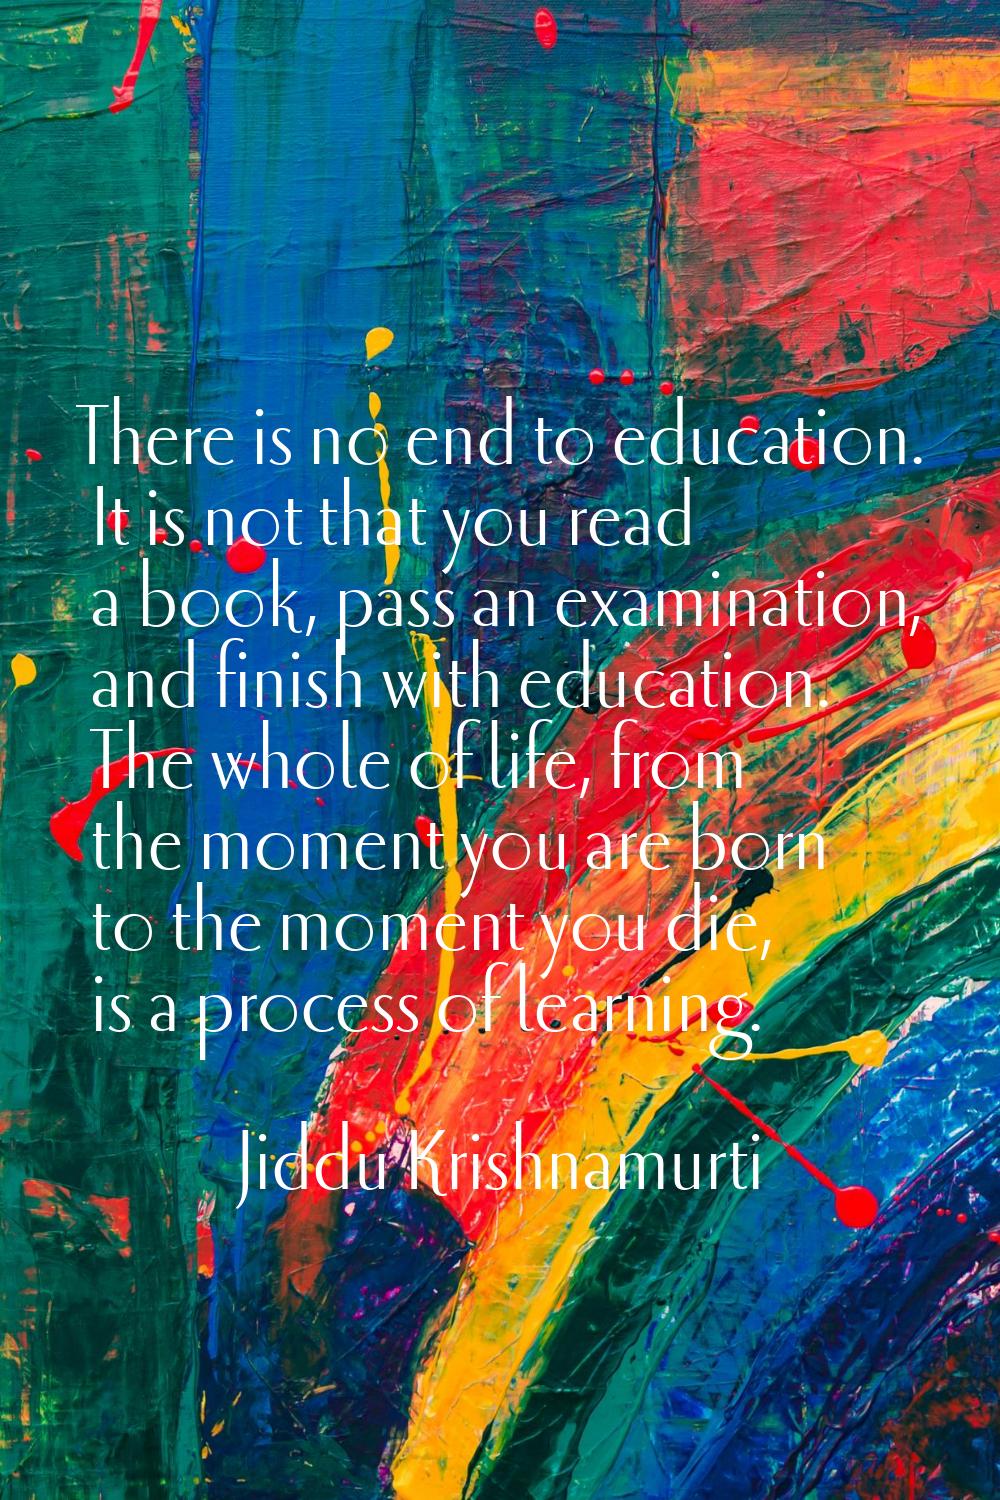 There is no end to education. It is not that you read a book, pass an examination, and finish with 